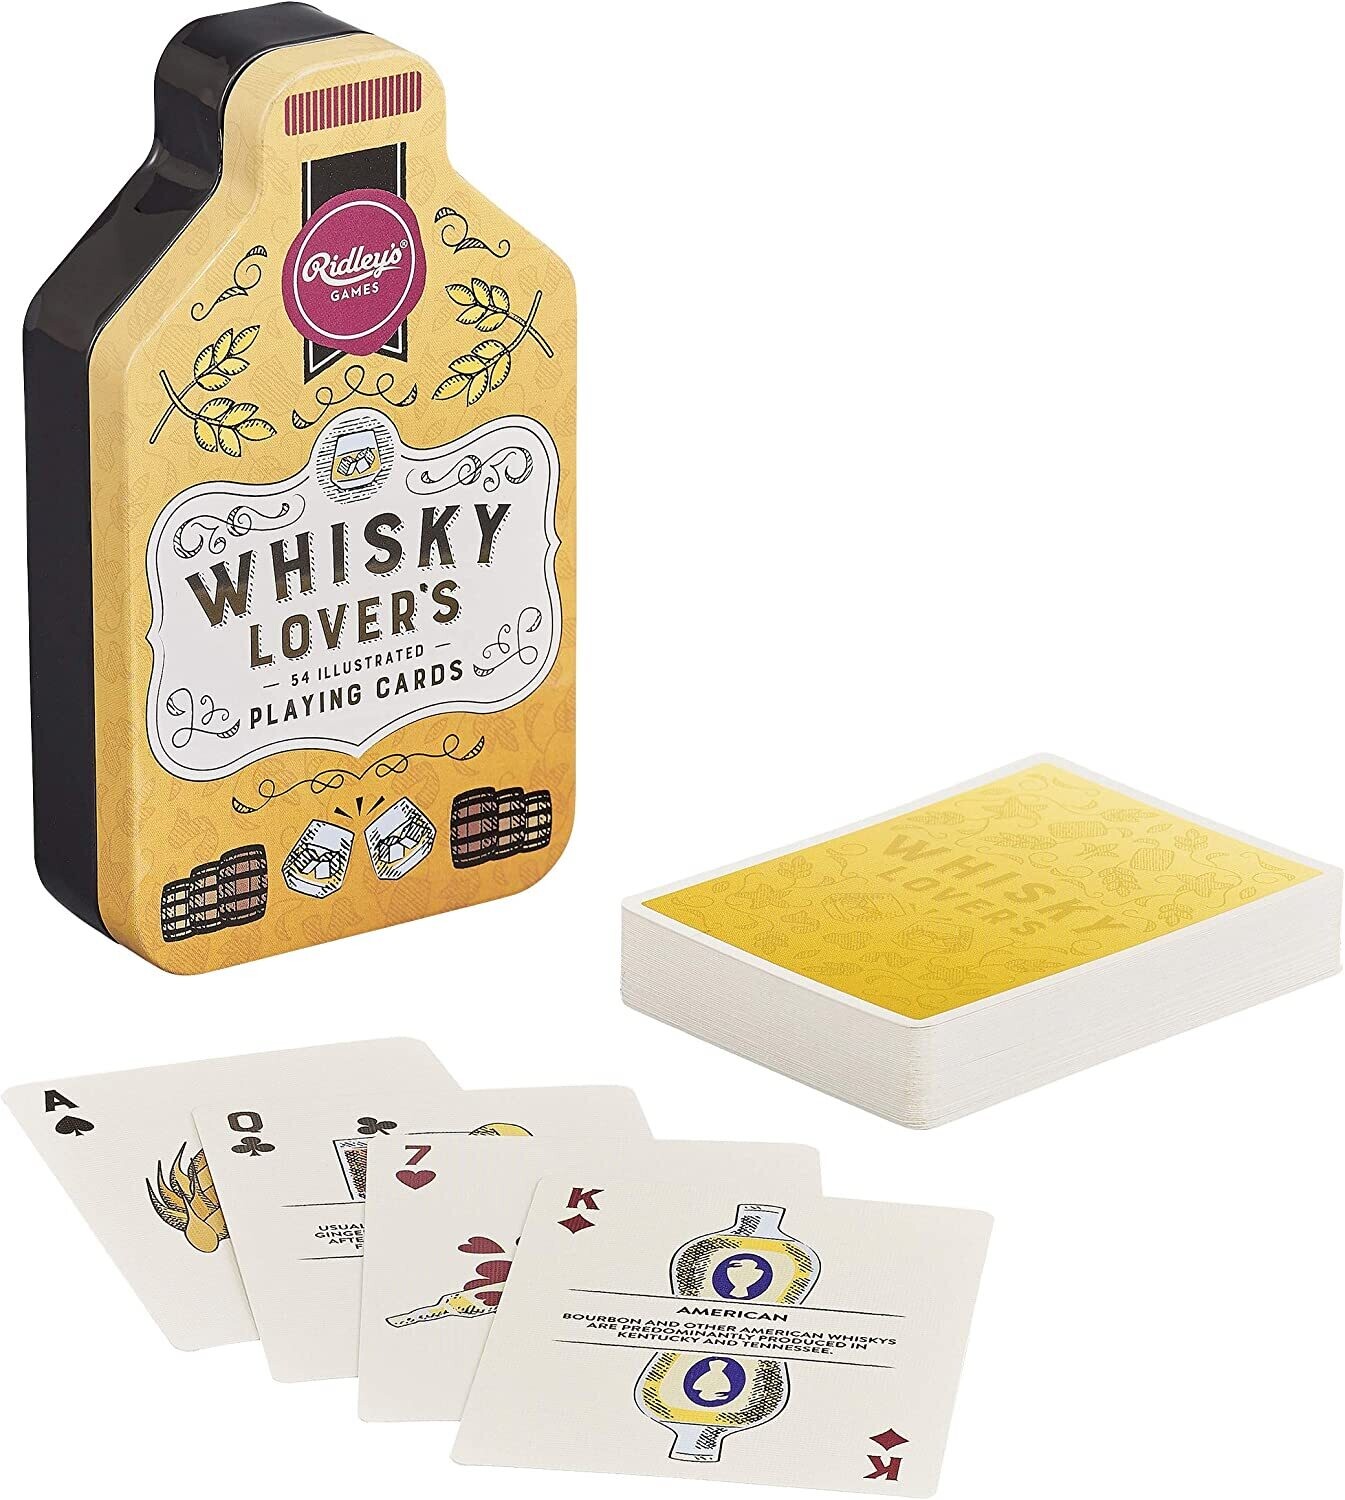 Playing Cards Whisky Lover's